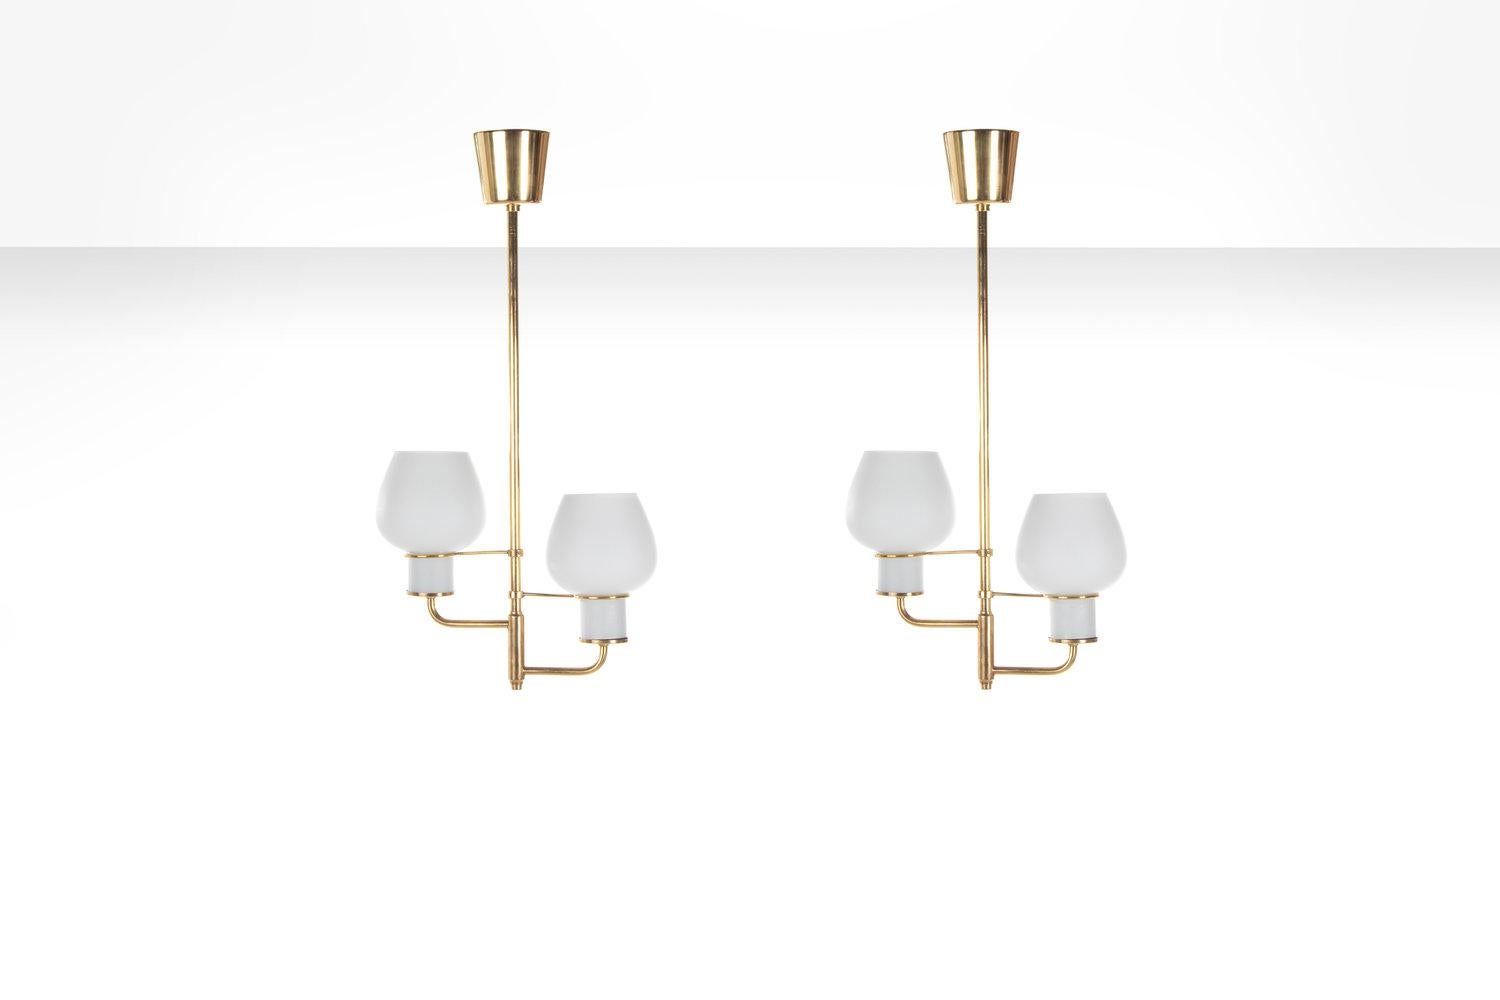 Two hand-blown, double opal glass shades with an organic shape, complimented by a beautiful brass body. The lamps are suspended by a firm stem, ending in a curvy brass canopy towards the ceiling. The neck of the shades is held by two additional